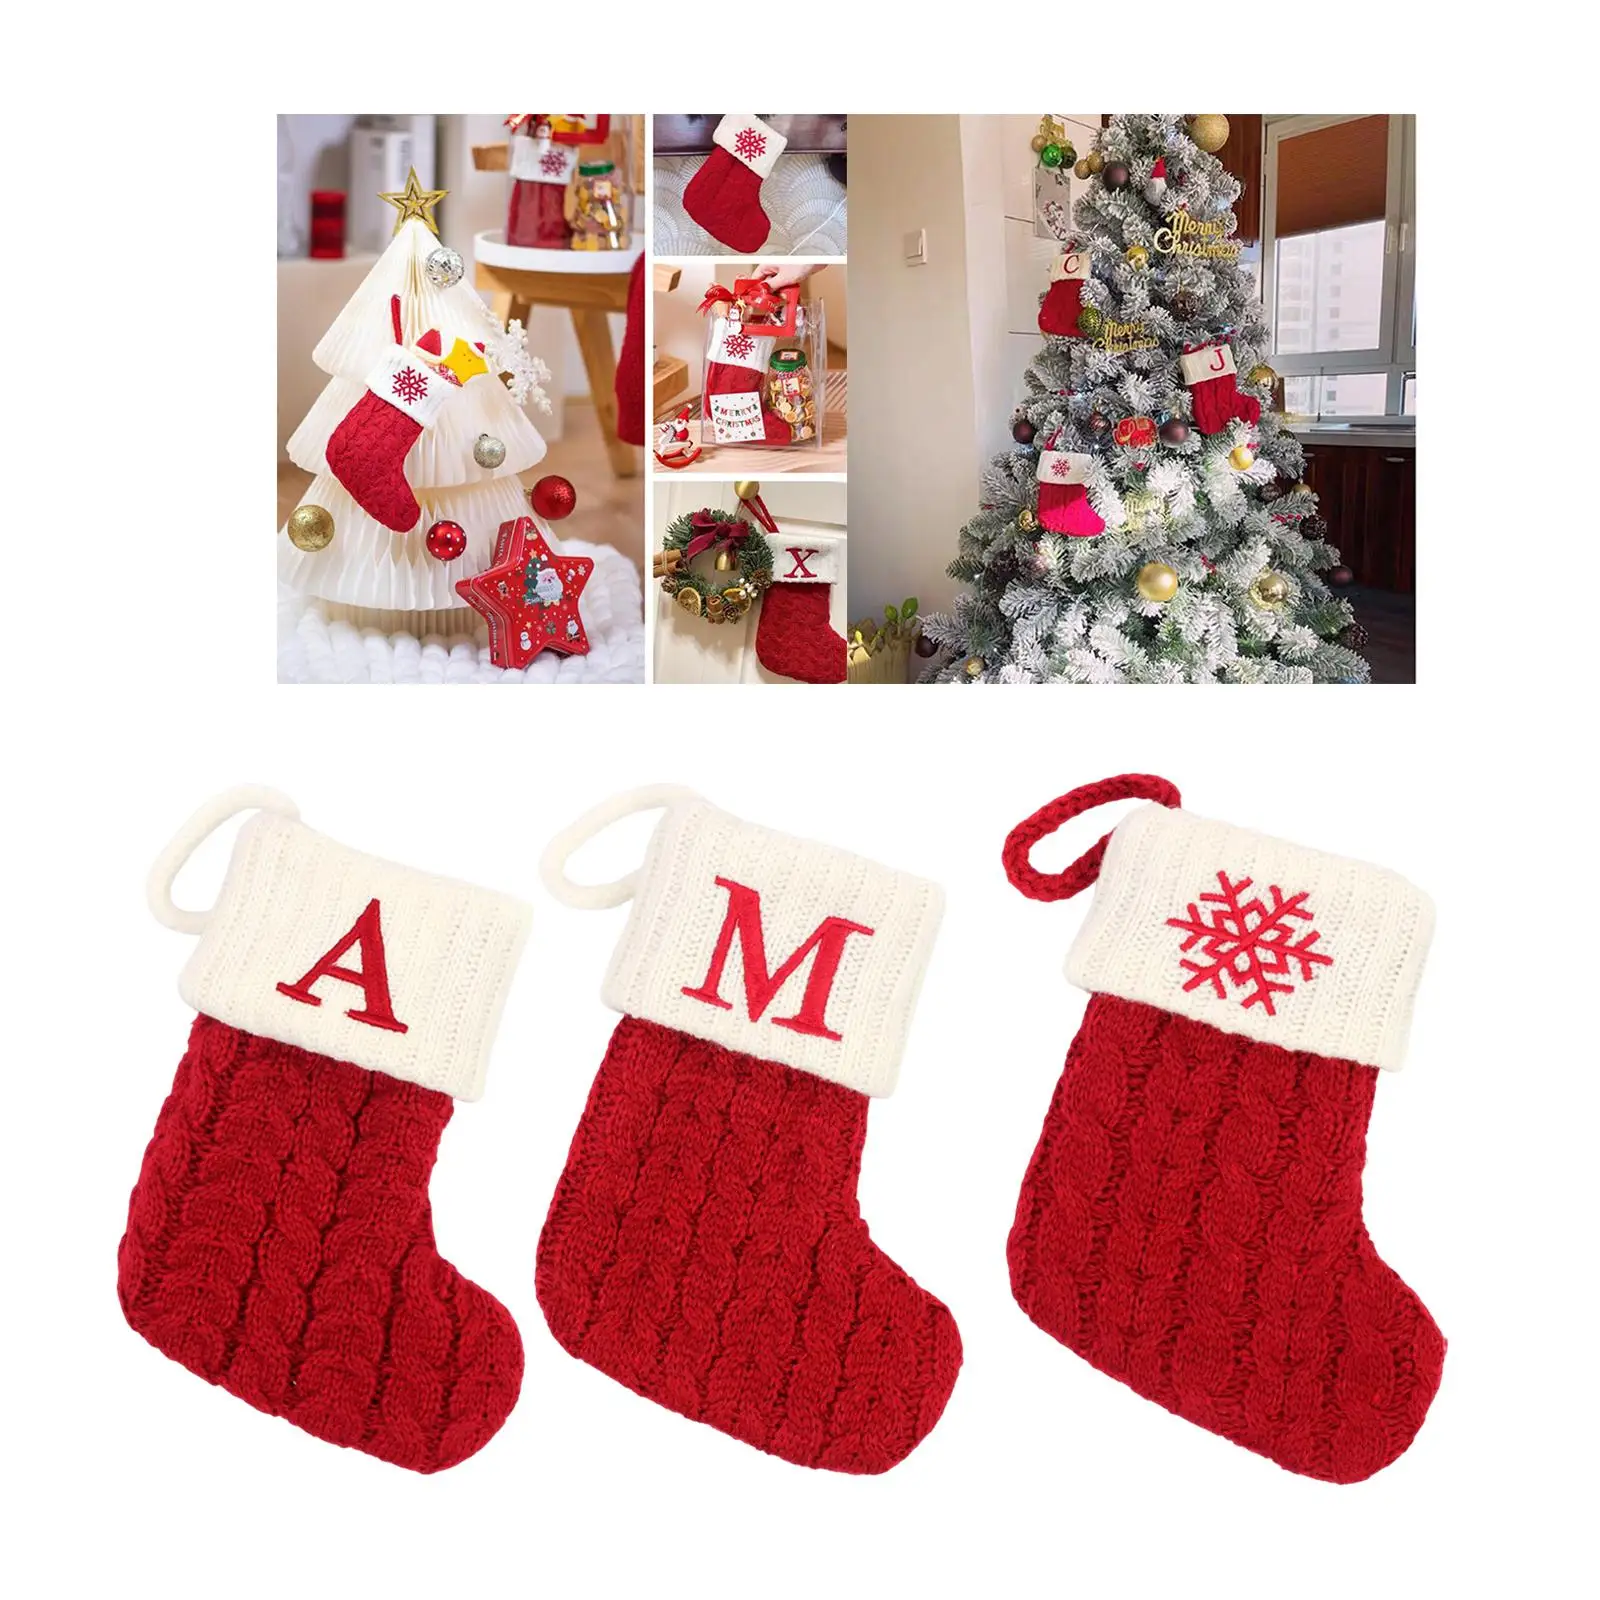 Hanging Christmas Stocking Knit Sock Floral Candy Gift Bag Crochet Cable Knit Christmas Stockings for Xmas Tree Home Decoration